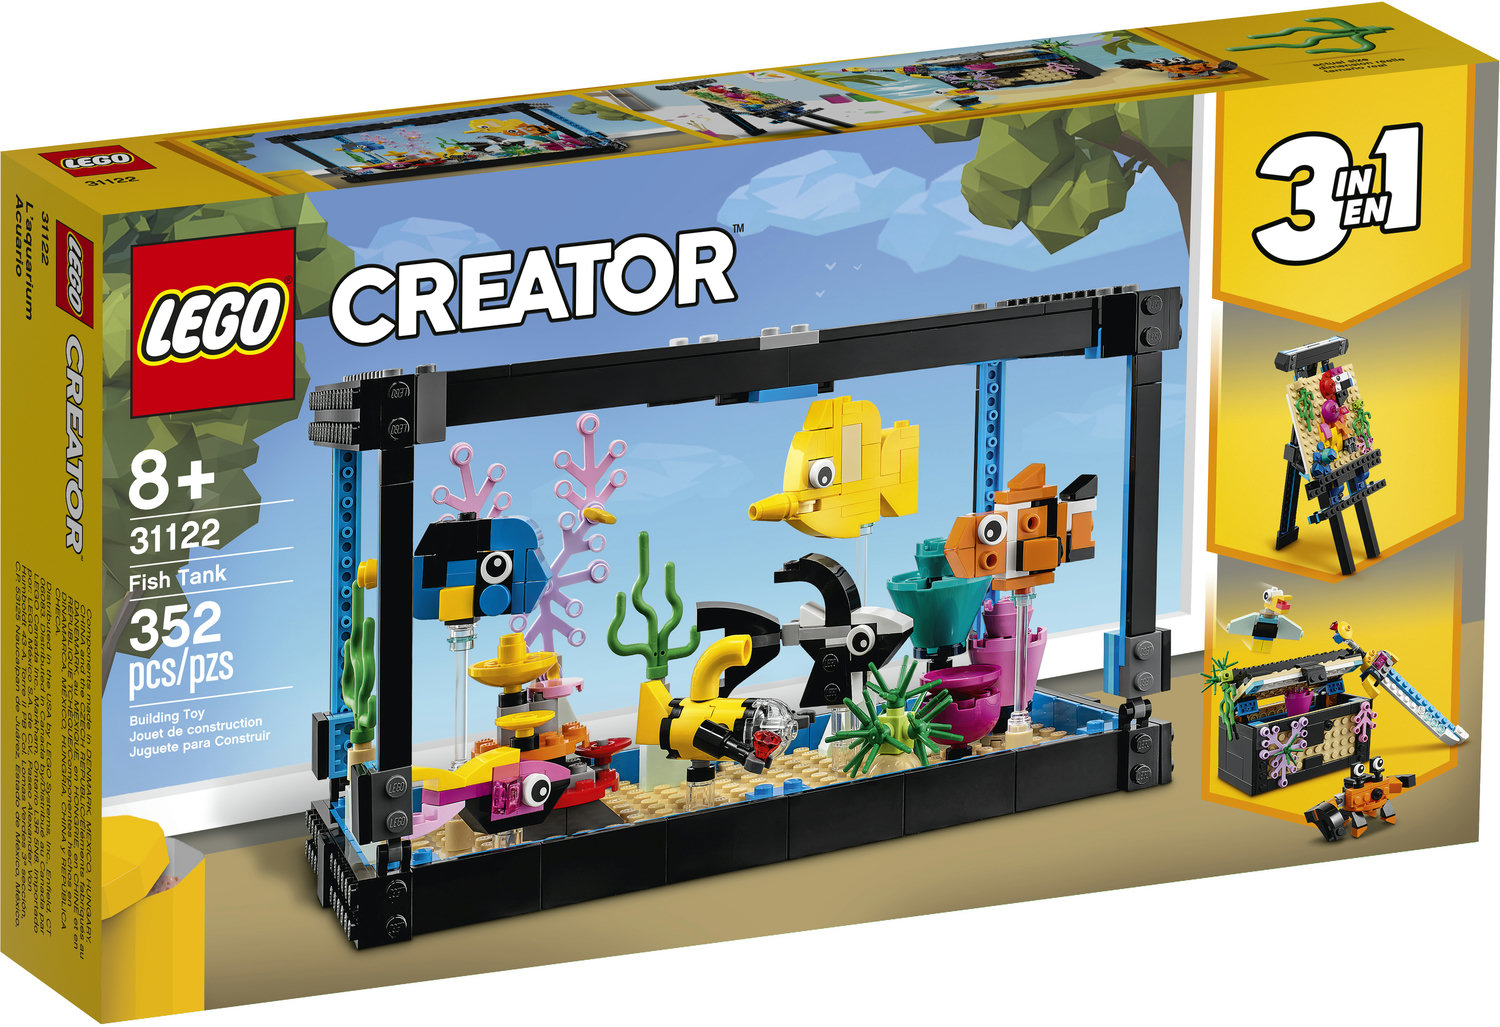 LEGO Creator 3in1 Fish Tank 31122 BuildingToy; Great Gift for Kids (352 Pieces) - image 5 of 11